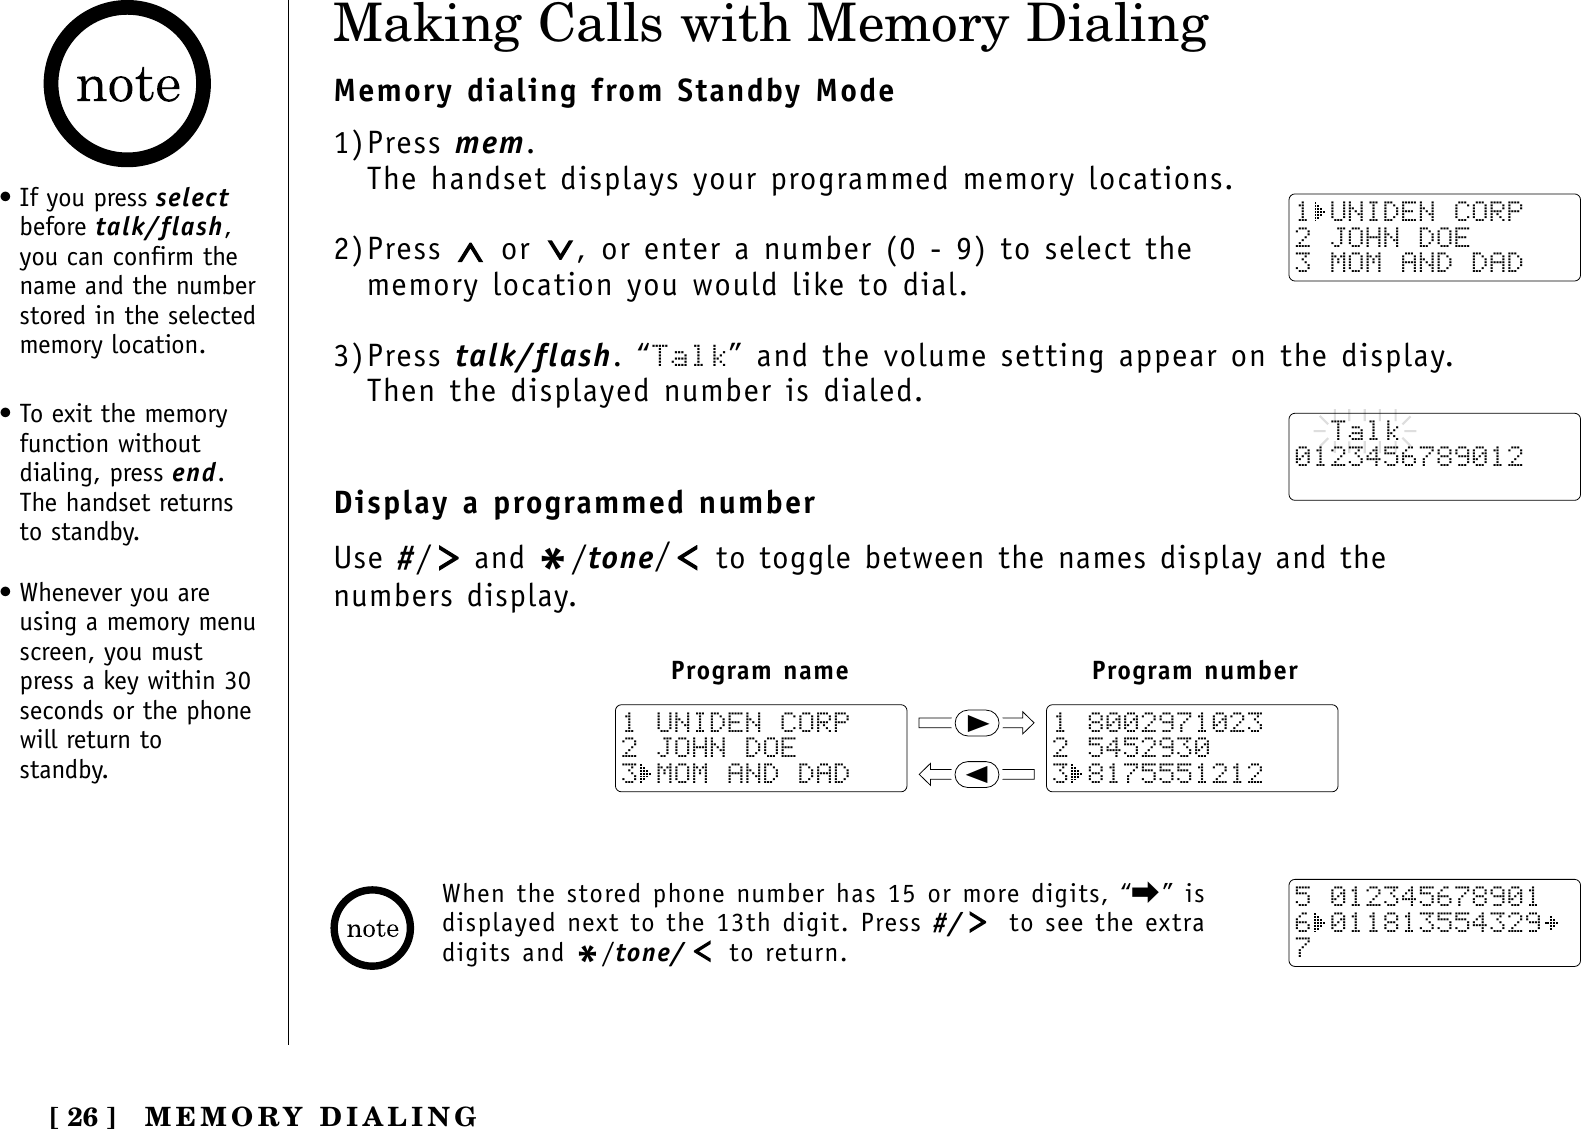 [ 26 ]Making Calls with Memory DialingMemory dialing from Standby Mode1)Press mem.The handset displays your programmed memory locations.2)Press  or  , or enter a number (0 - 9) to select thememory location you would like to dial.3)Press talk/flash. “Talk” and the volume setting appear on the display. Then the displayed number is dialed.Display a programmed numberUse #/and */tone/to toggle between the names display and the numbers display.1 UNIDEN CORP2 JOHN DOE3 MOM AND DAD  Talk0123456789012Program name Program number111 80029710232 54529303 81755512121 UNIDEN CORP2 JOHN DOE3 MOM AND DAD5 0123456789016 0118135543297When the stored phone number has 15 or more digits, “\” isdisplayed next to the 13th digit. Press #/ to see the extradigits and */tone/ to return.• If you press selectbefore talk/flash,you can confirm thename and the numberstored in the selectedmemory location.• To exit the memoryfunction withoutdialing, press end.The handset returnsto standby.• Whenever you areusing a memory menuscreen, you mustpress a key within 30seconds or the phonewill return tostandby.MEMORY DIALING